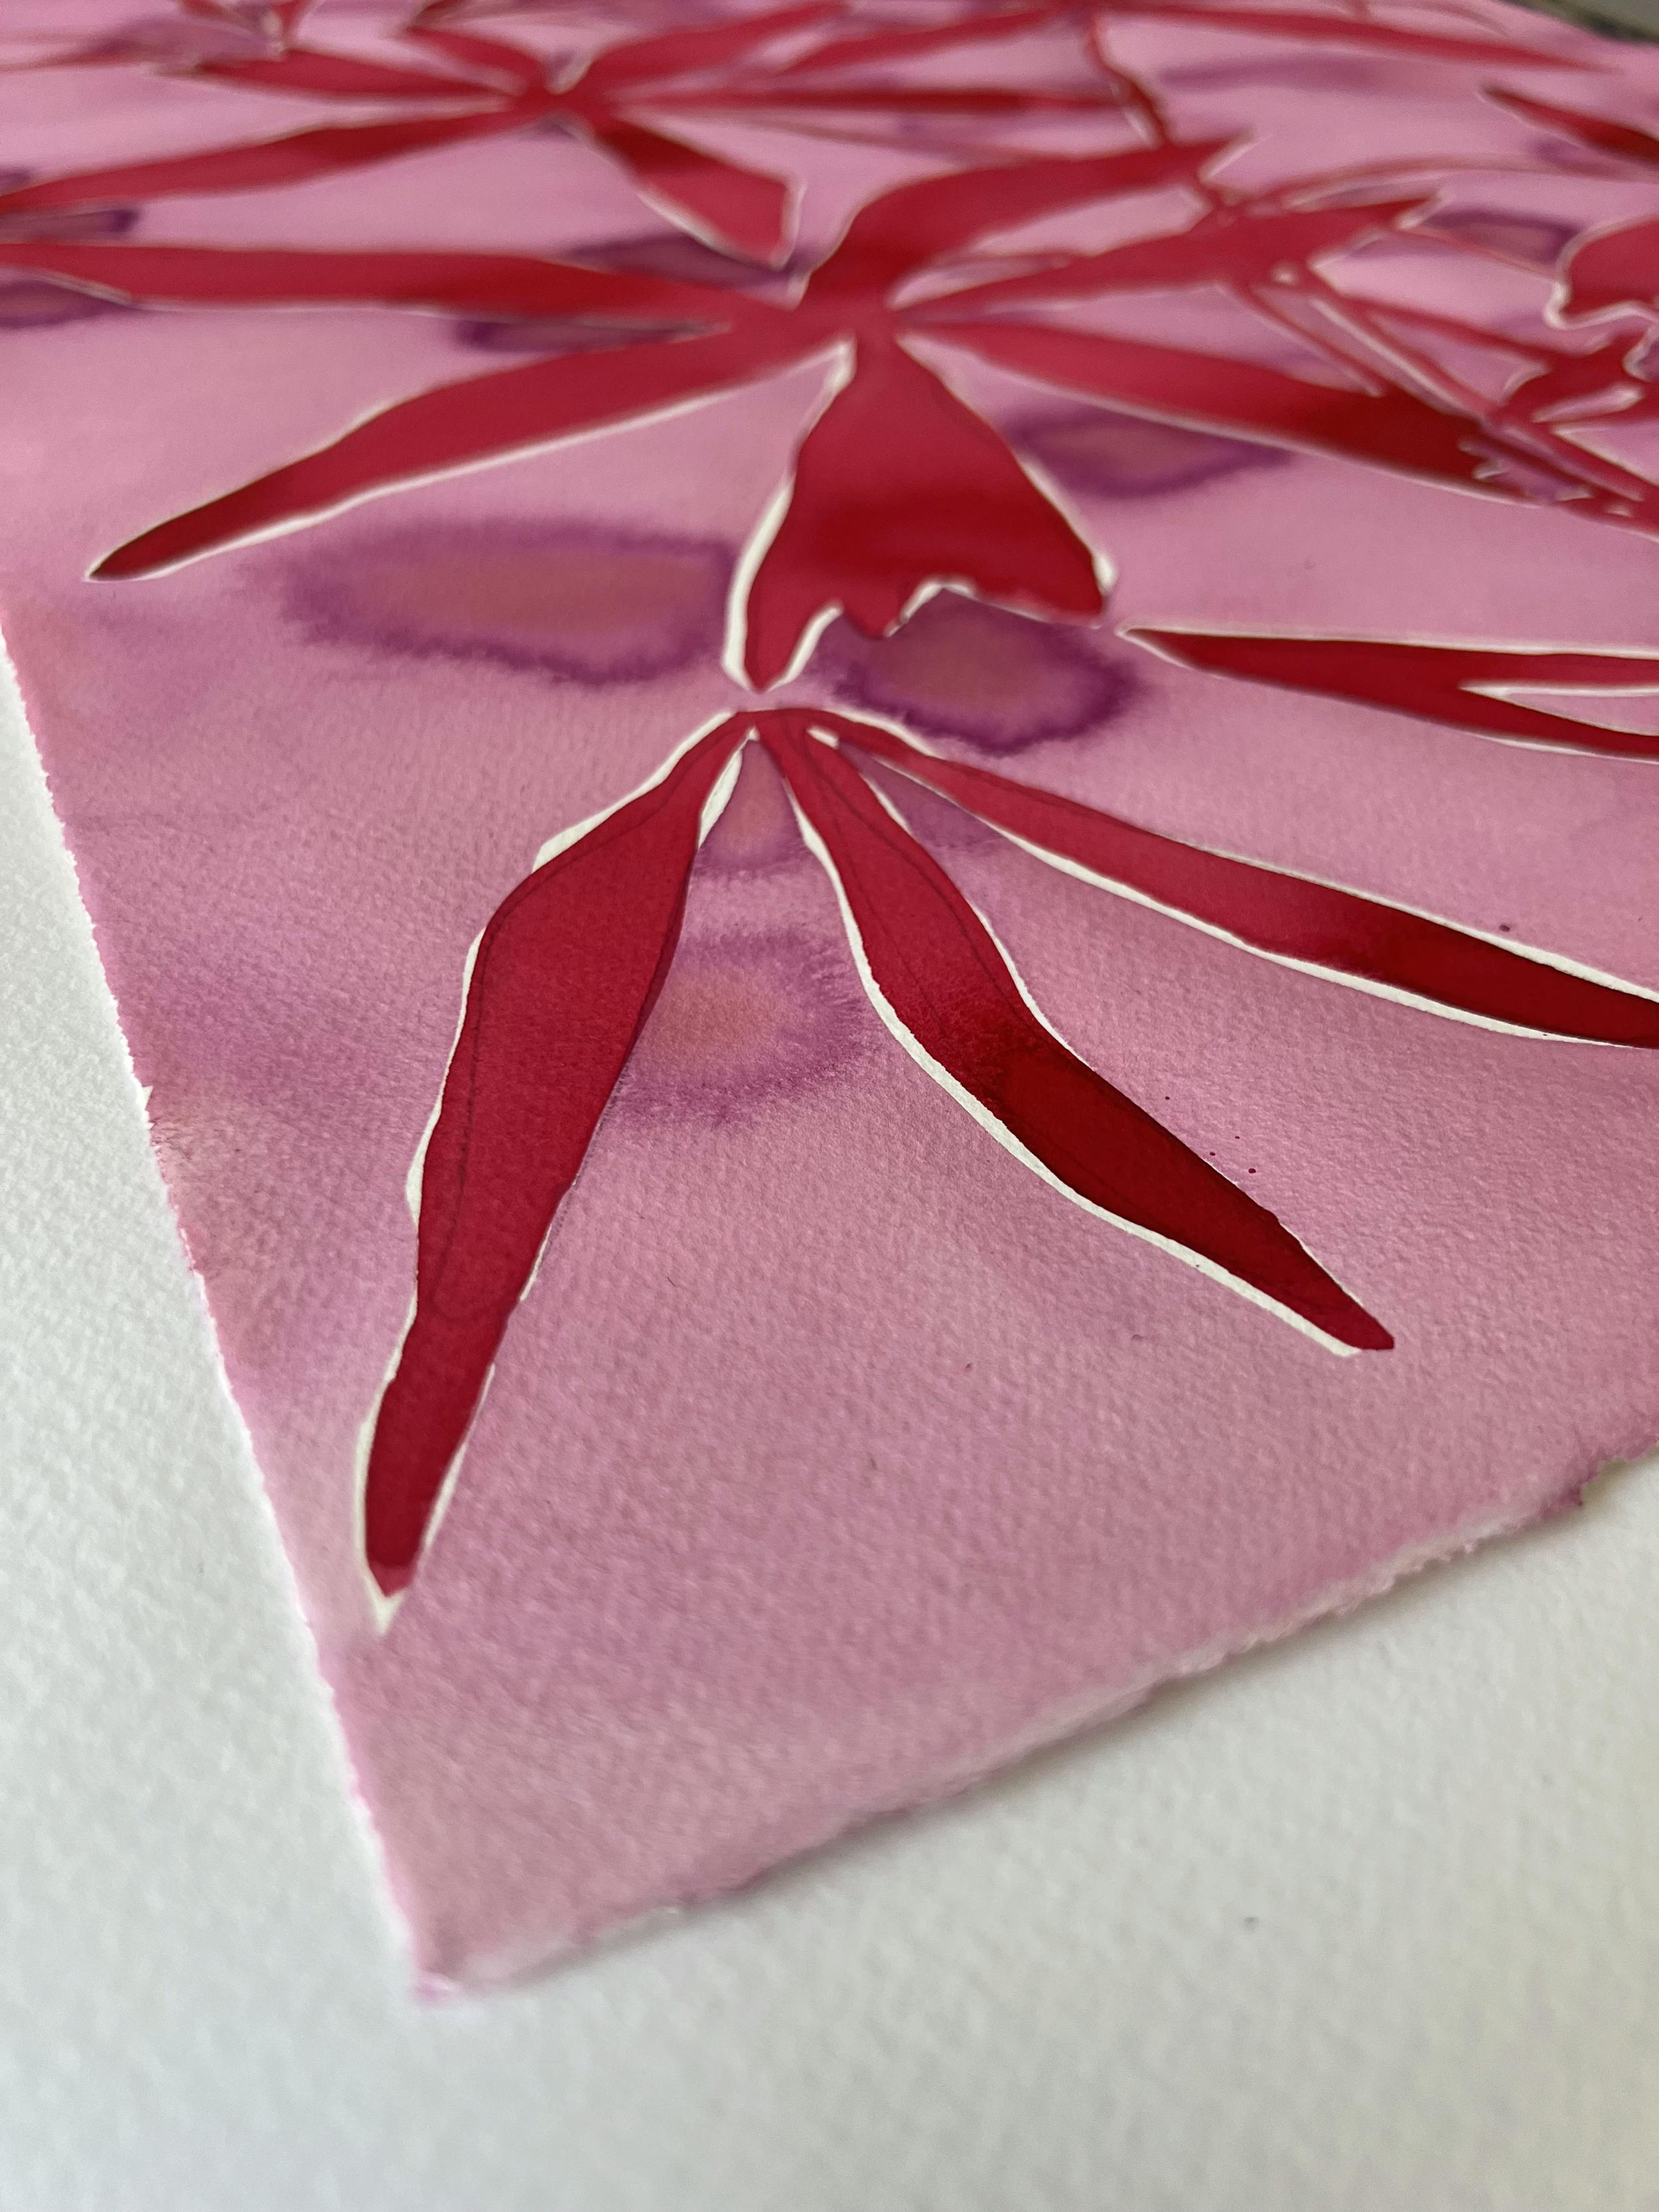 Close-up of a pink and red abstract, botanical work on paper by artist Kate Roebuck.